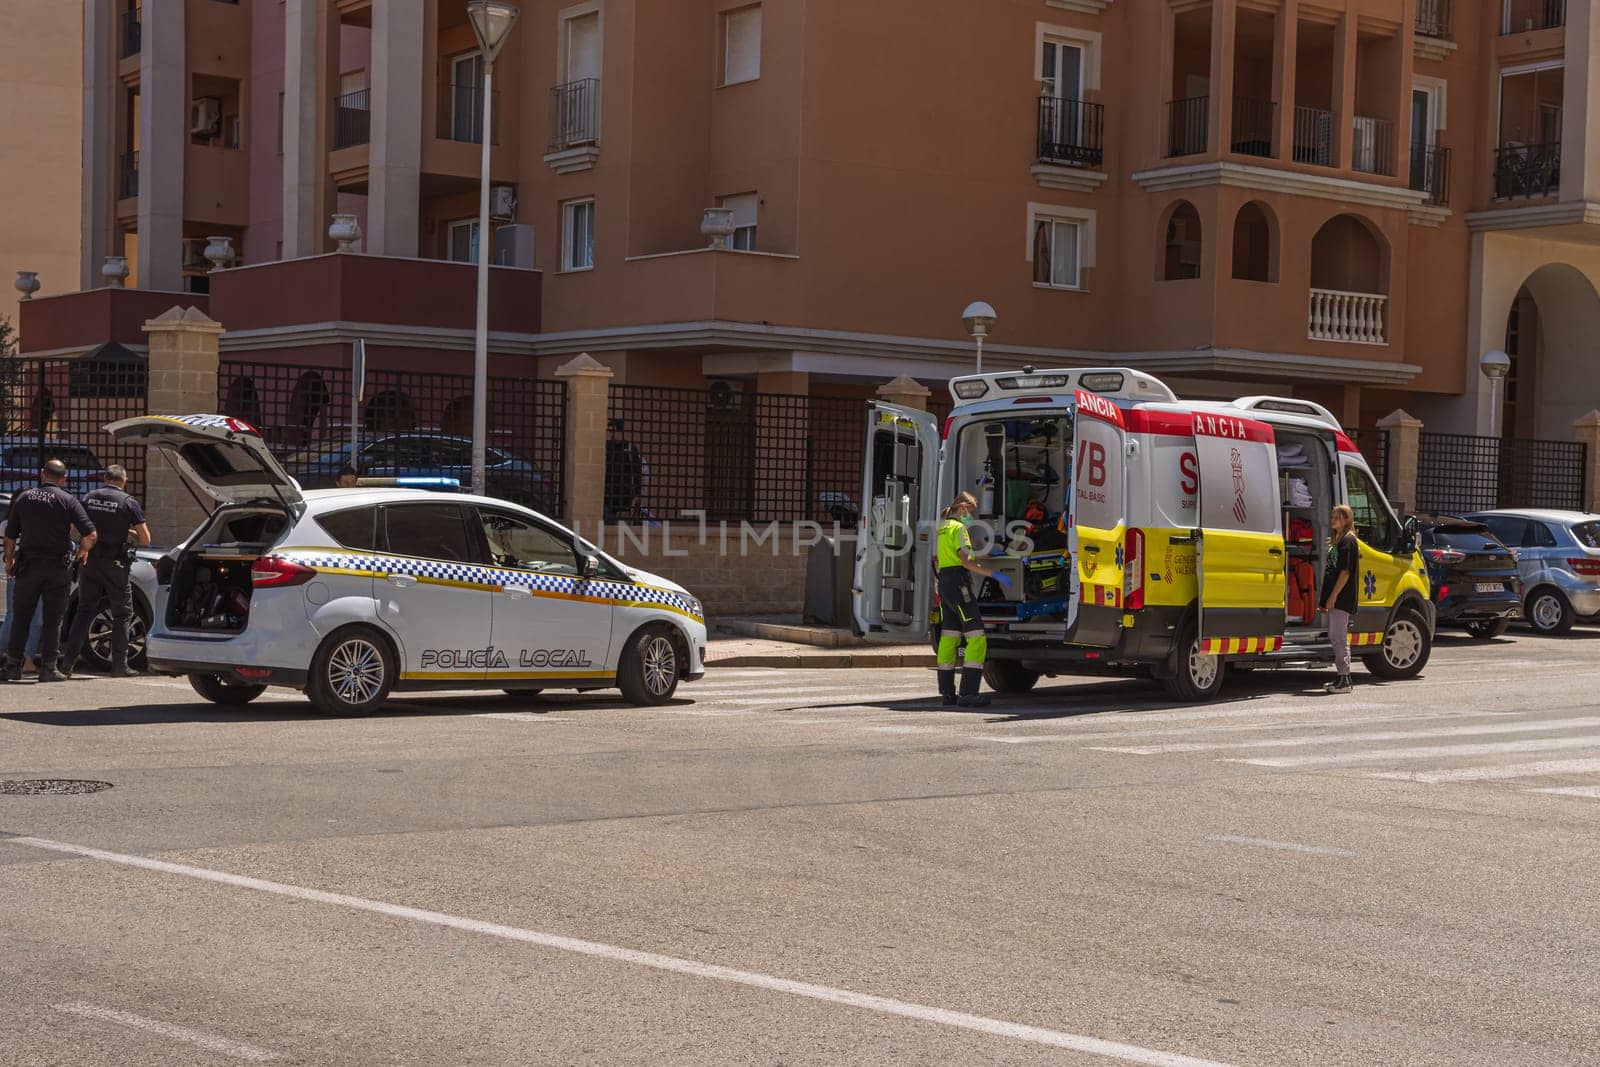 knocked down a man in the city on the road, Spain, Torrevieja on May 28, 2023, an ambulance on the road picks up a person injured by PopOff